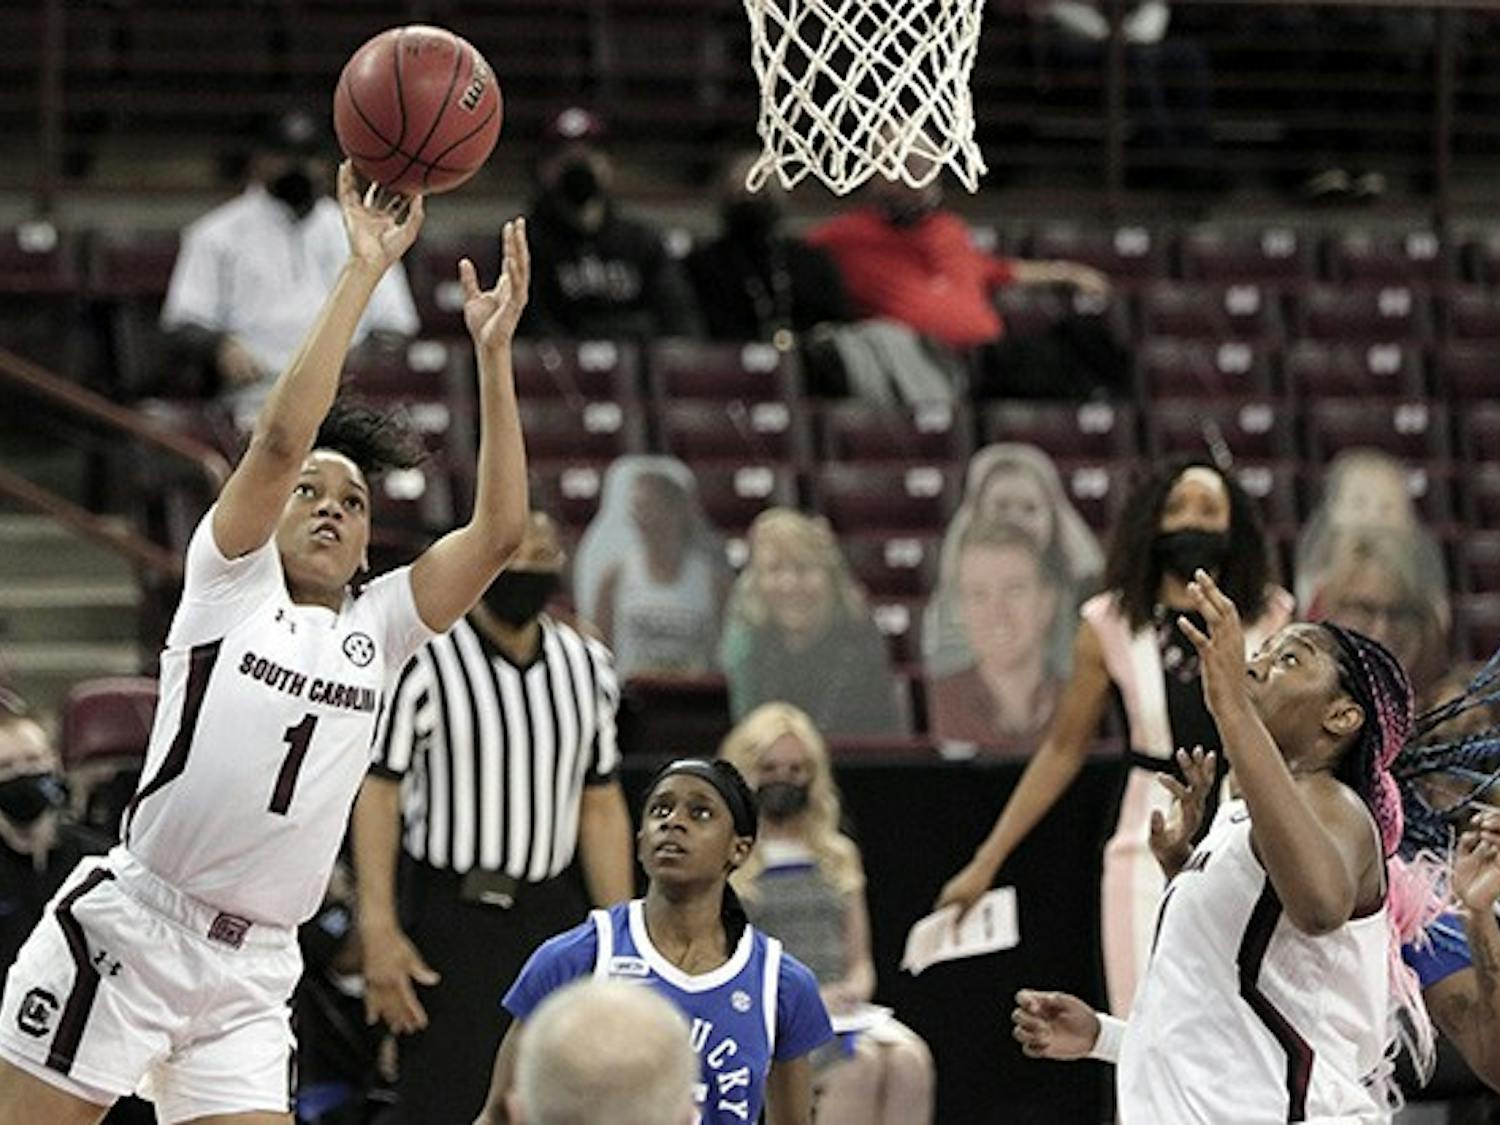 Sophomore guard Zia Cooke shoots the ball. South Carolina won against Kentucky 76-55, bouncing back from the team's loss against Tennessee.